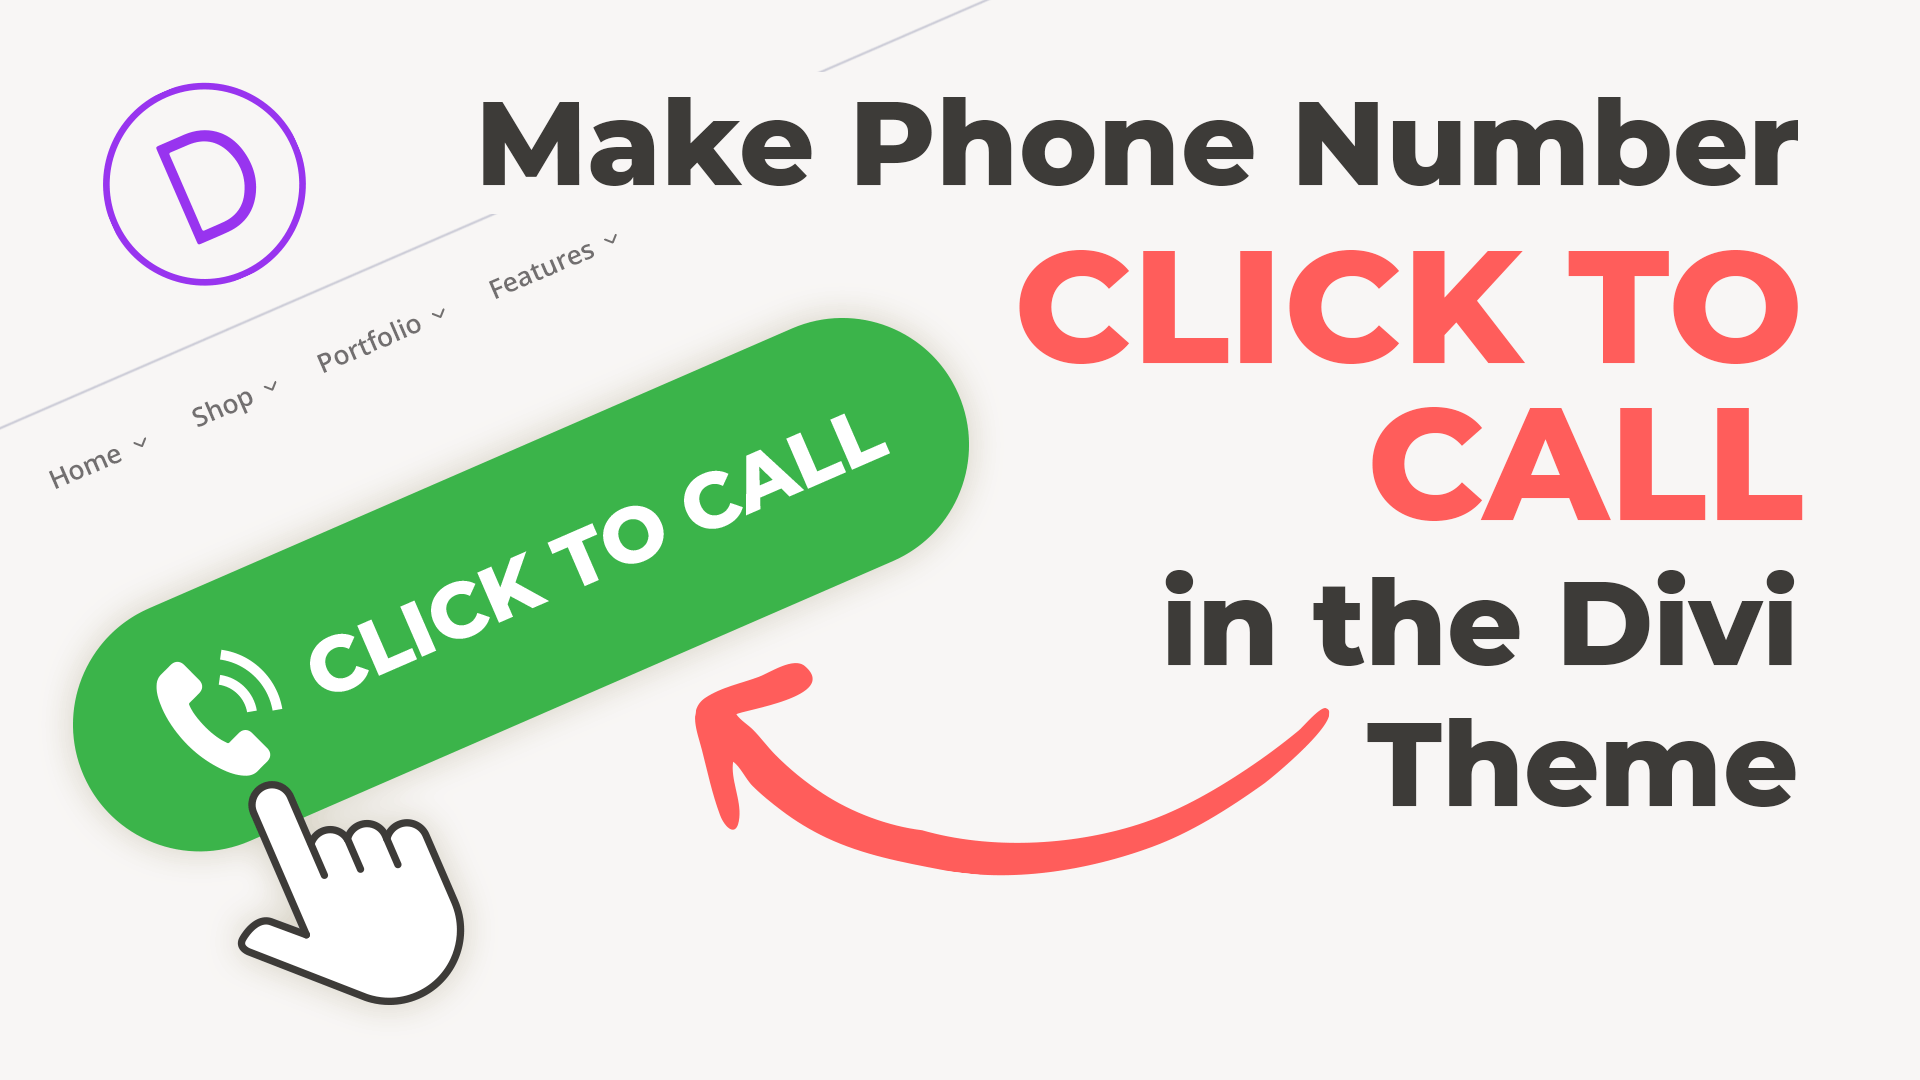 Make Phone Number Click to Call in the Divi Theme